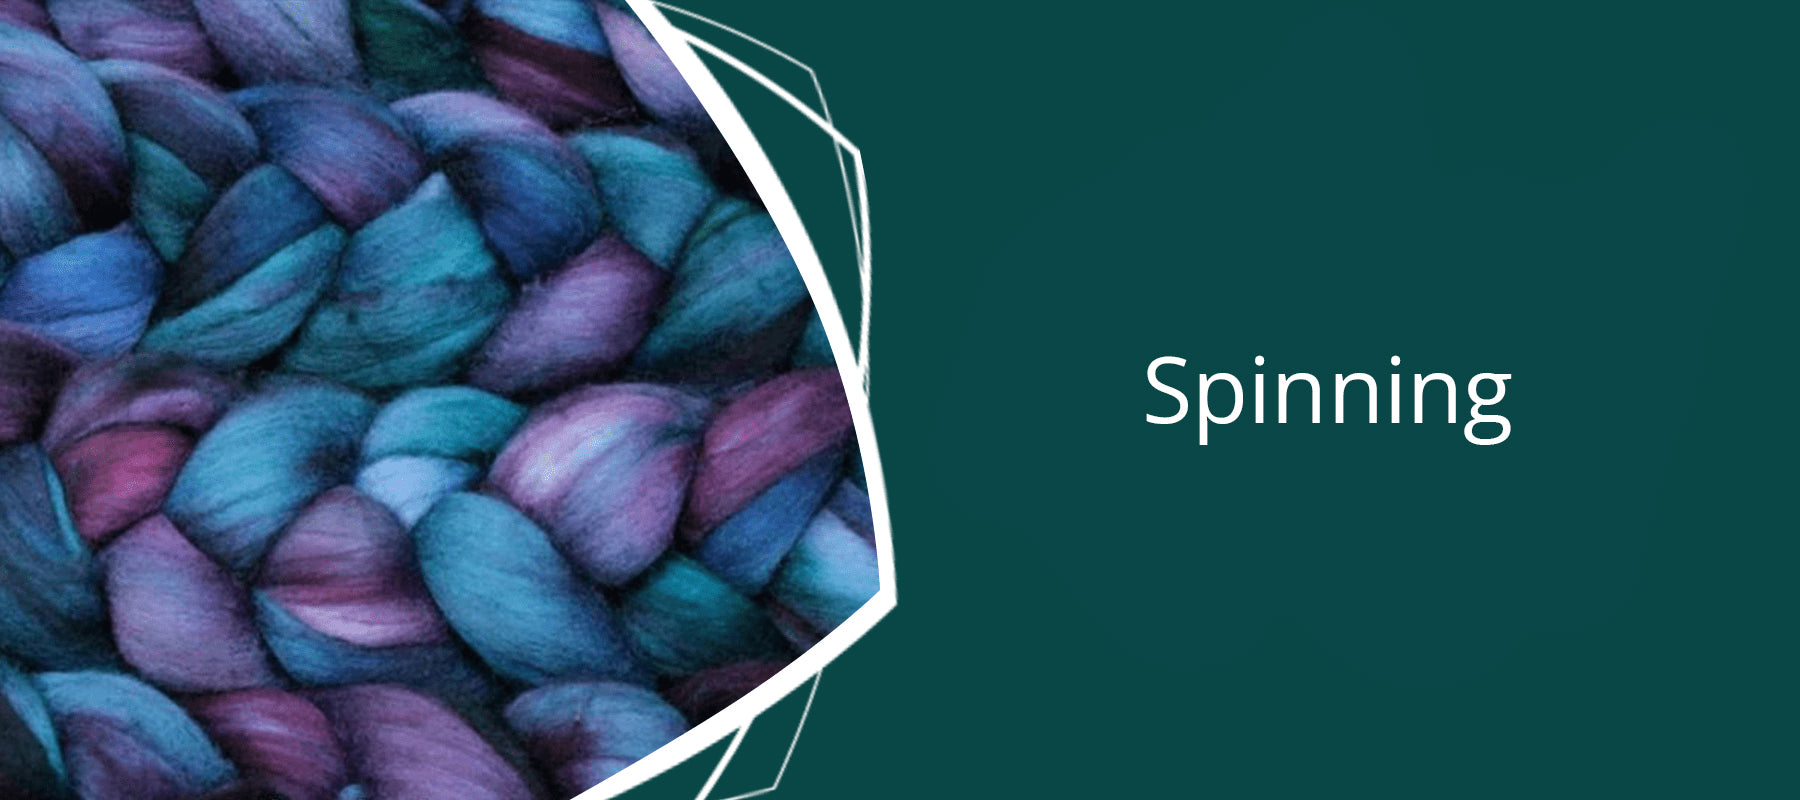 Buy spinning wheels, spinning fibre, and accessories online - Thread Collective Australia